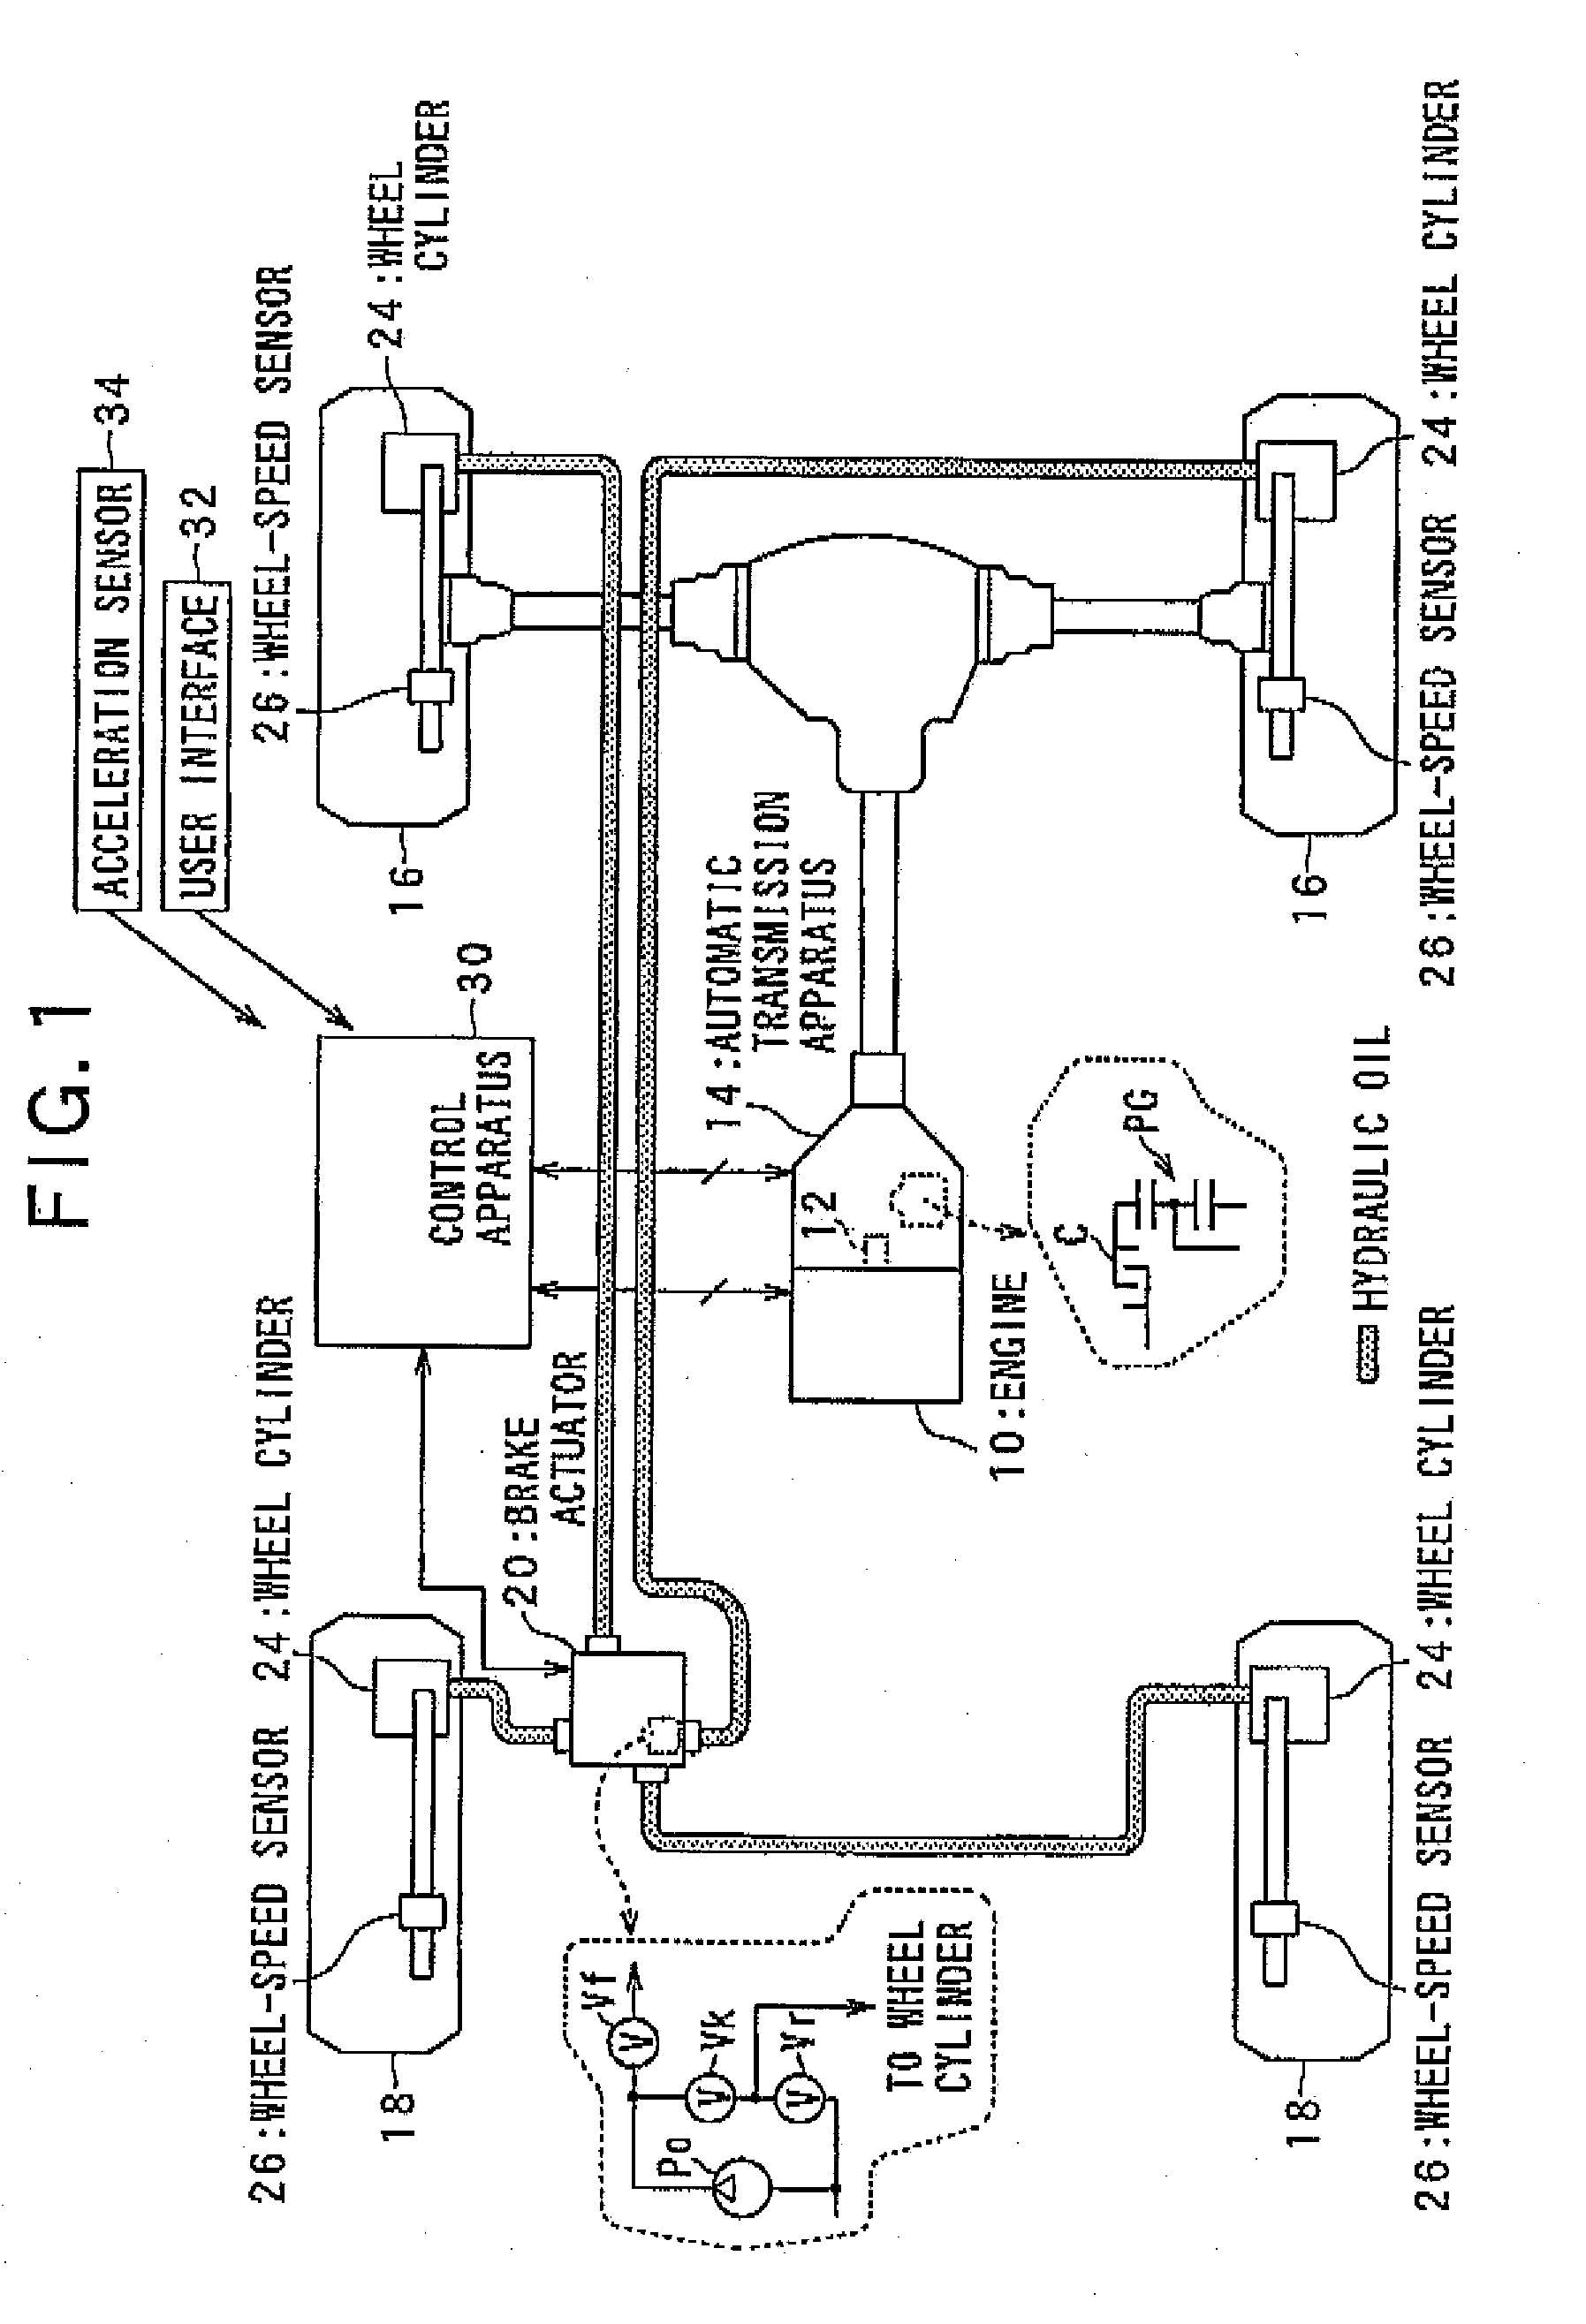 Apparatus and system for controlling automatic stopping of vehicle